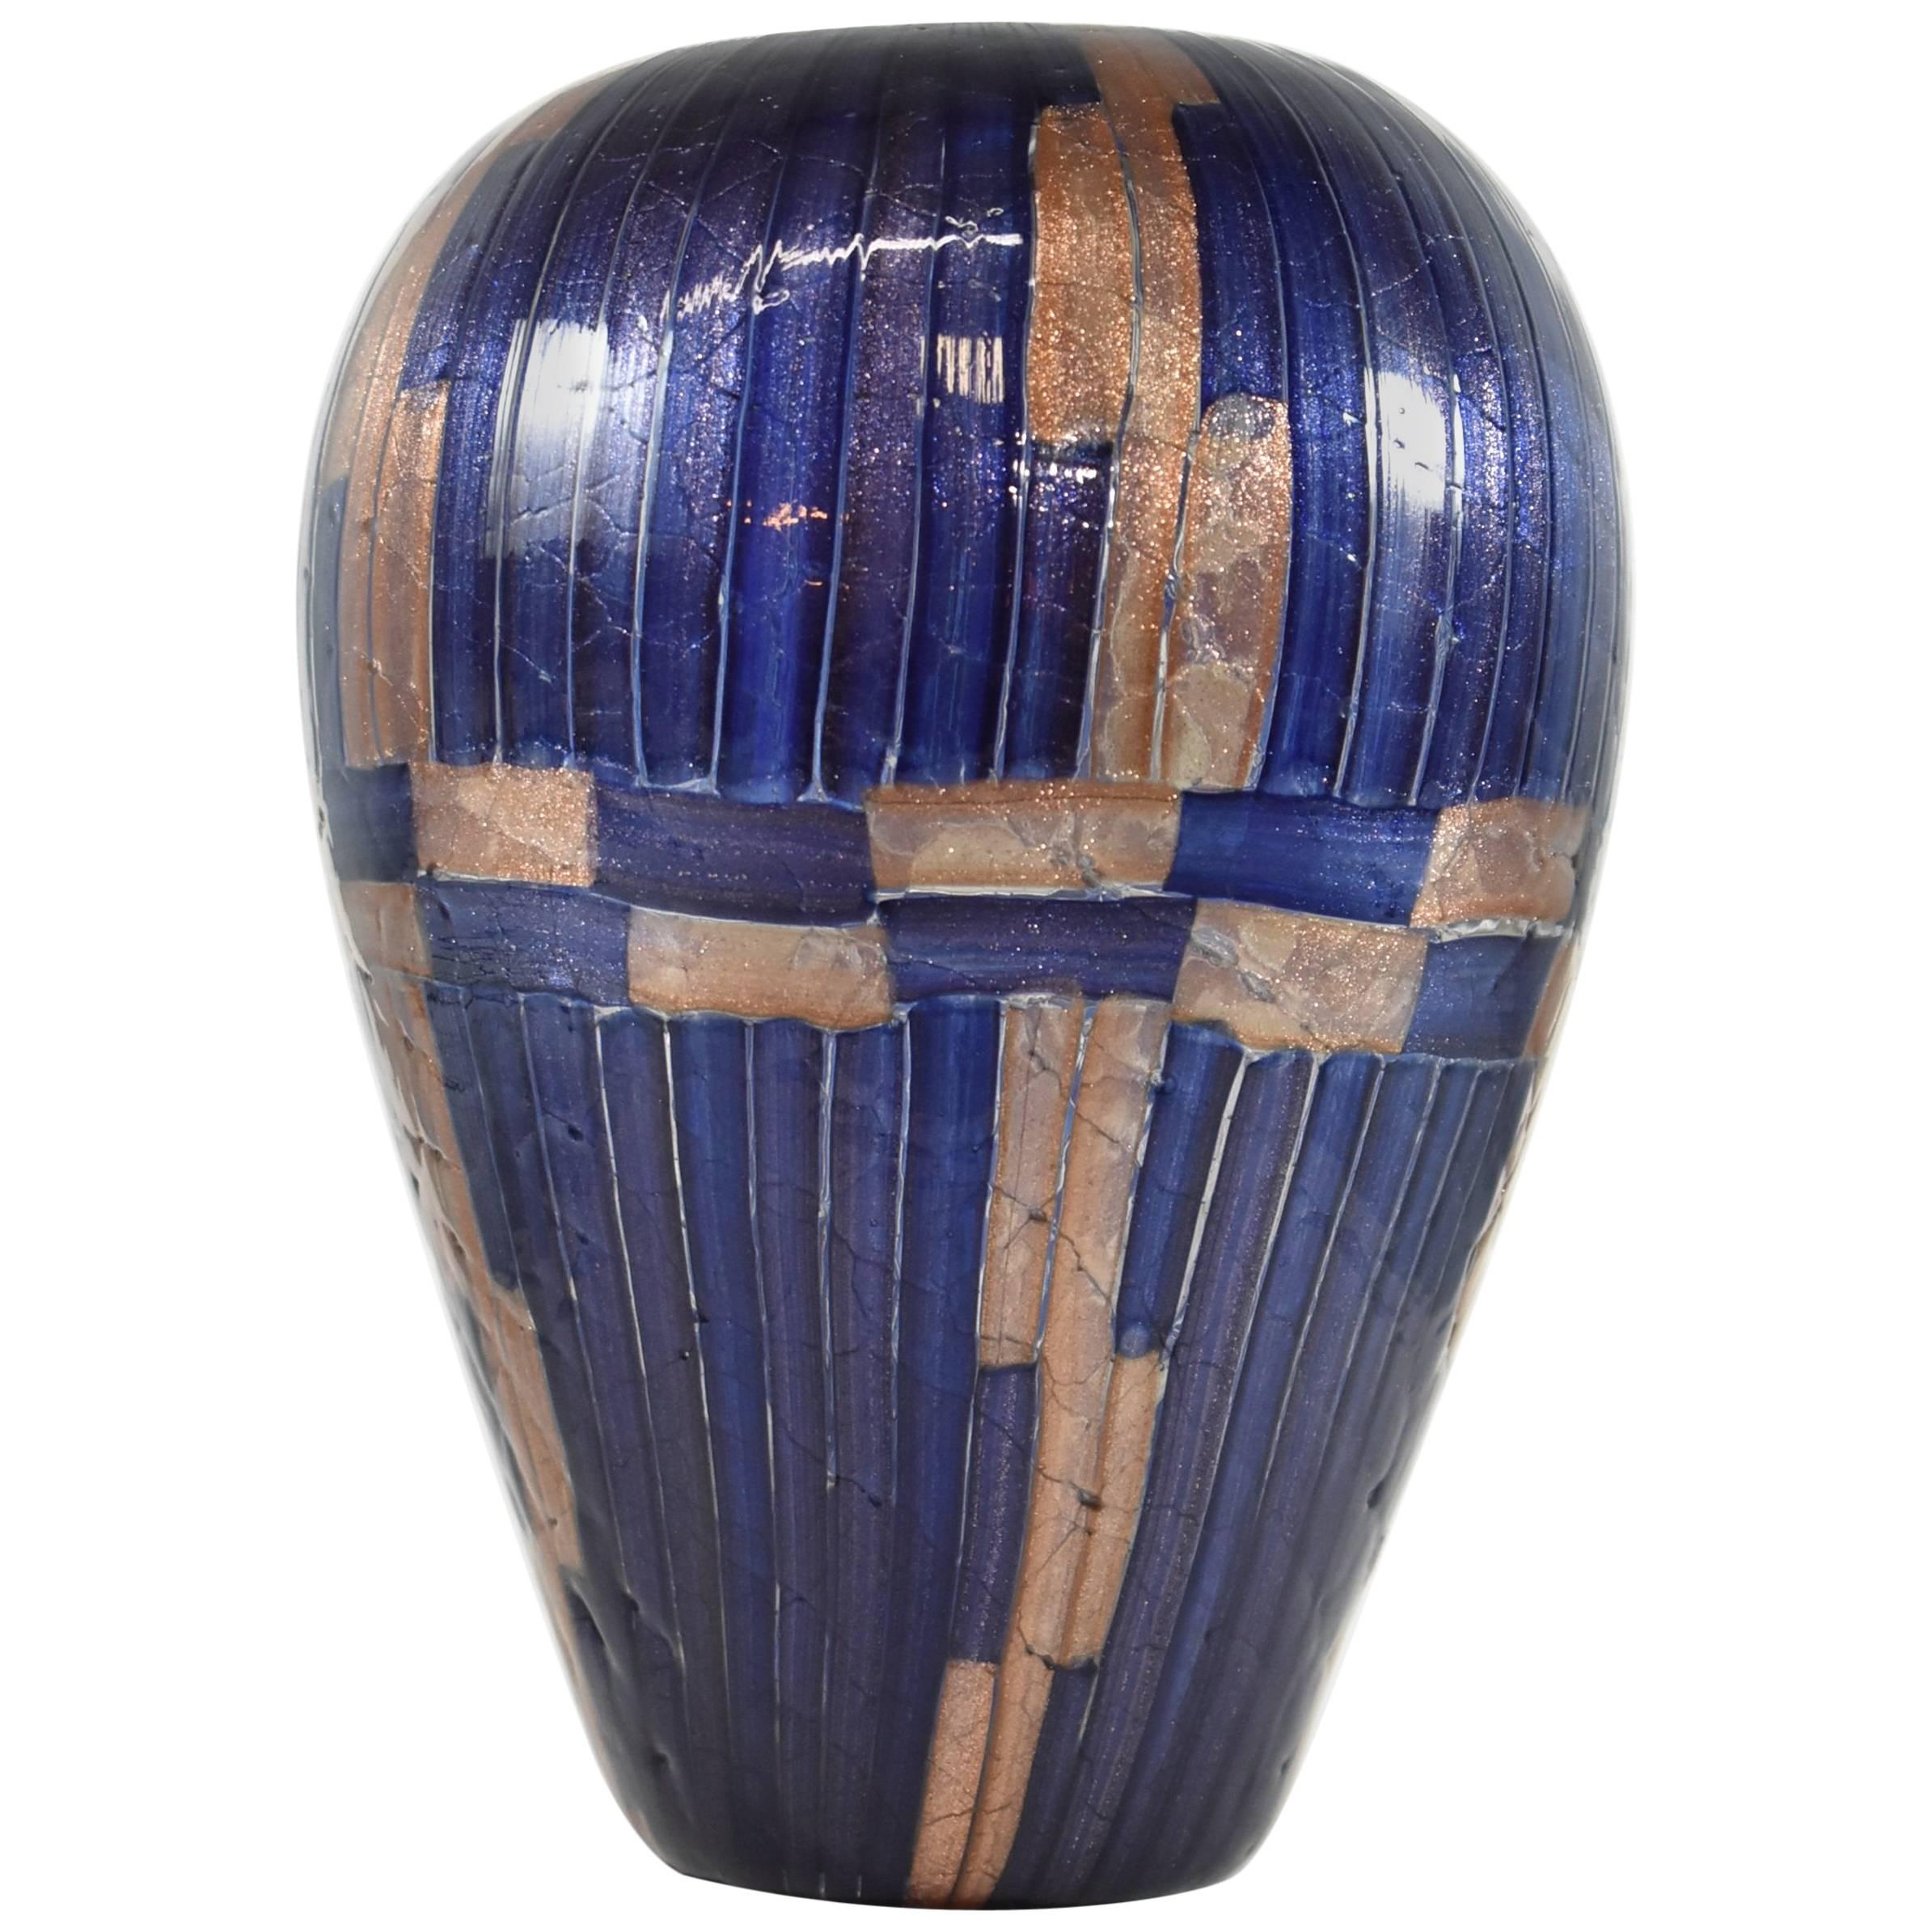 Cobalt and Gold Art Glass Vase by Massimo Nordio, circa 1947